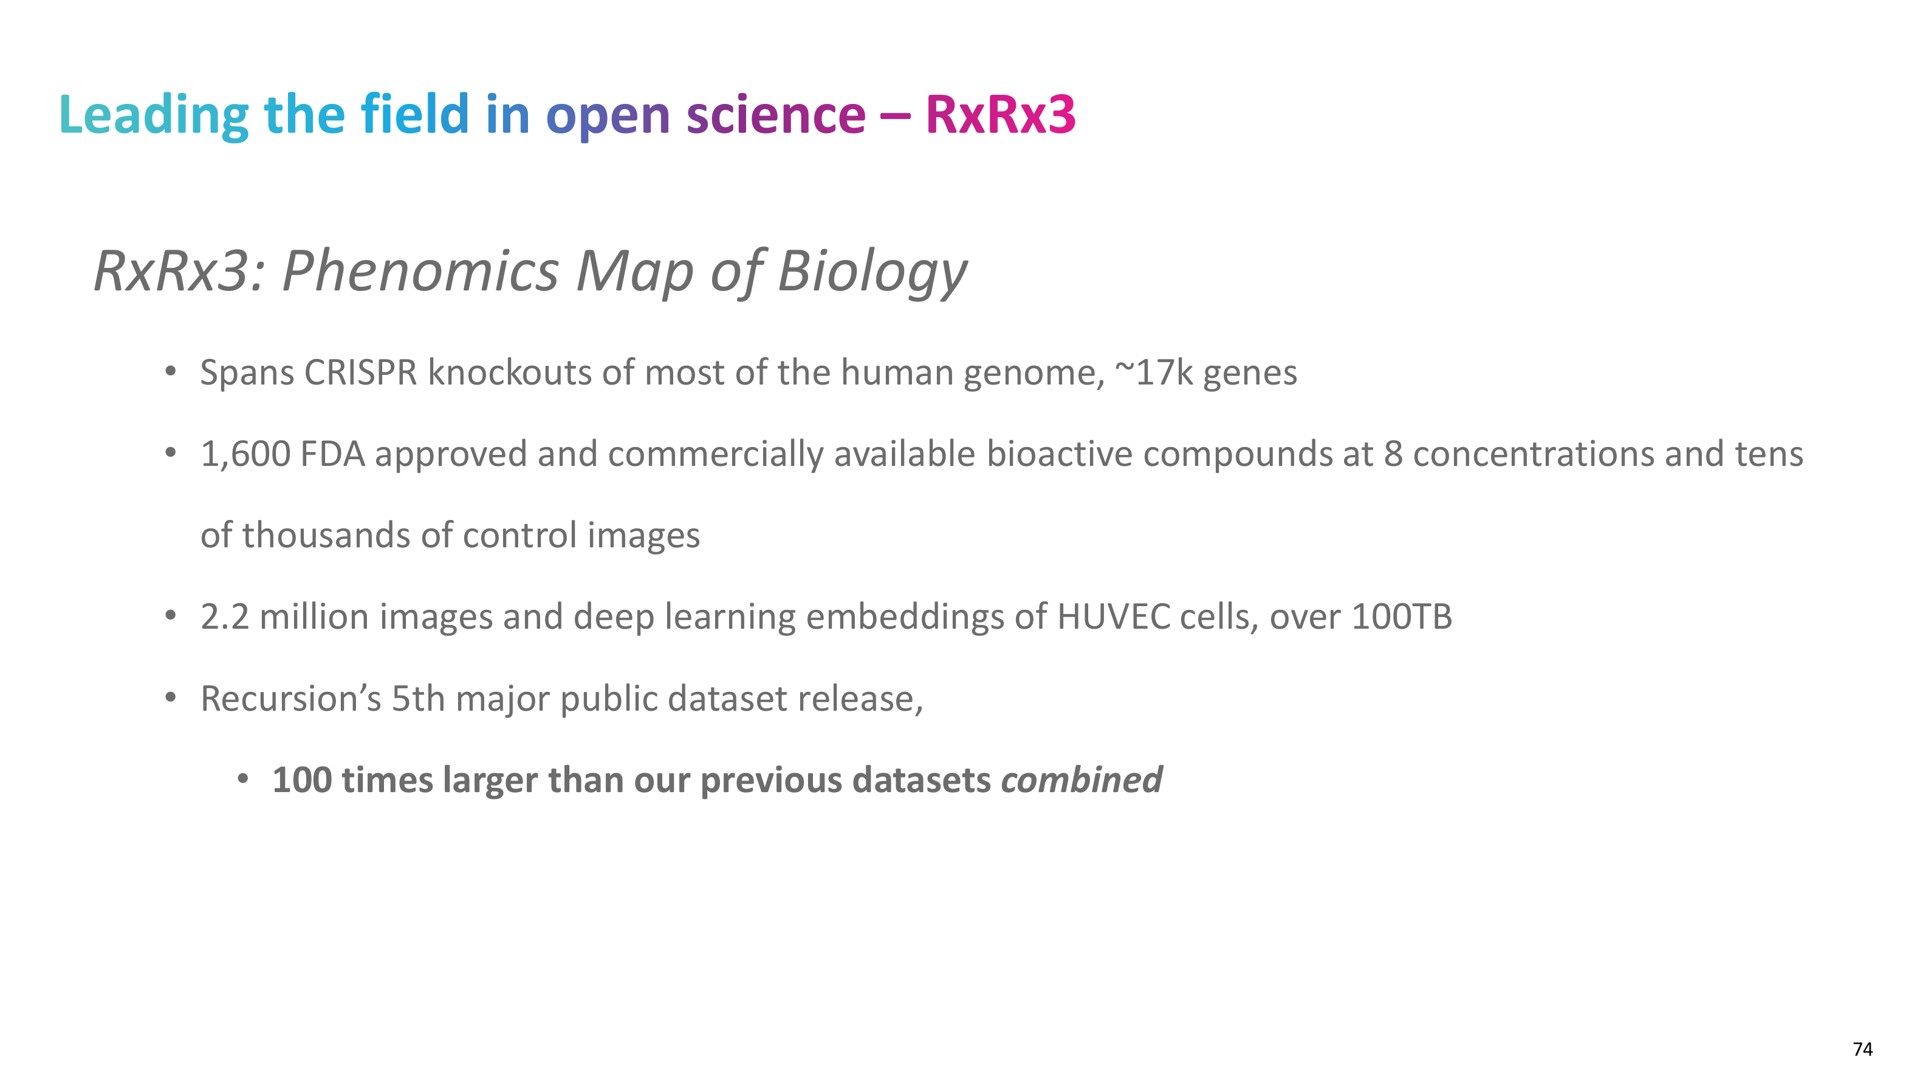 map of biology spans knockouts of most of the human genome genes approved and commercially available compounds at concentrations and tens of thousands of control images million images and deep learning of cells over recursion major public release times than our previous combined leading field in open science | Recursion Pharmaceuticals